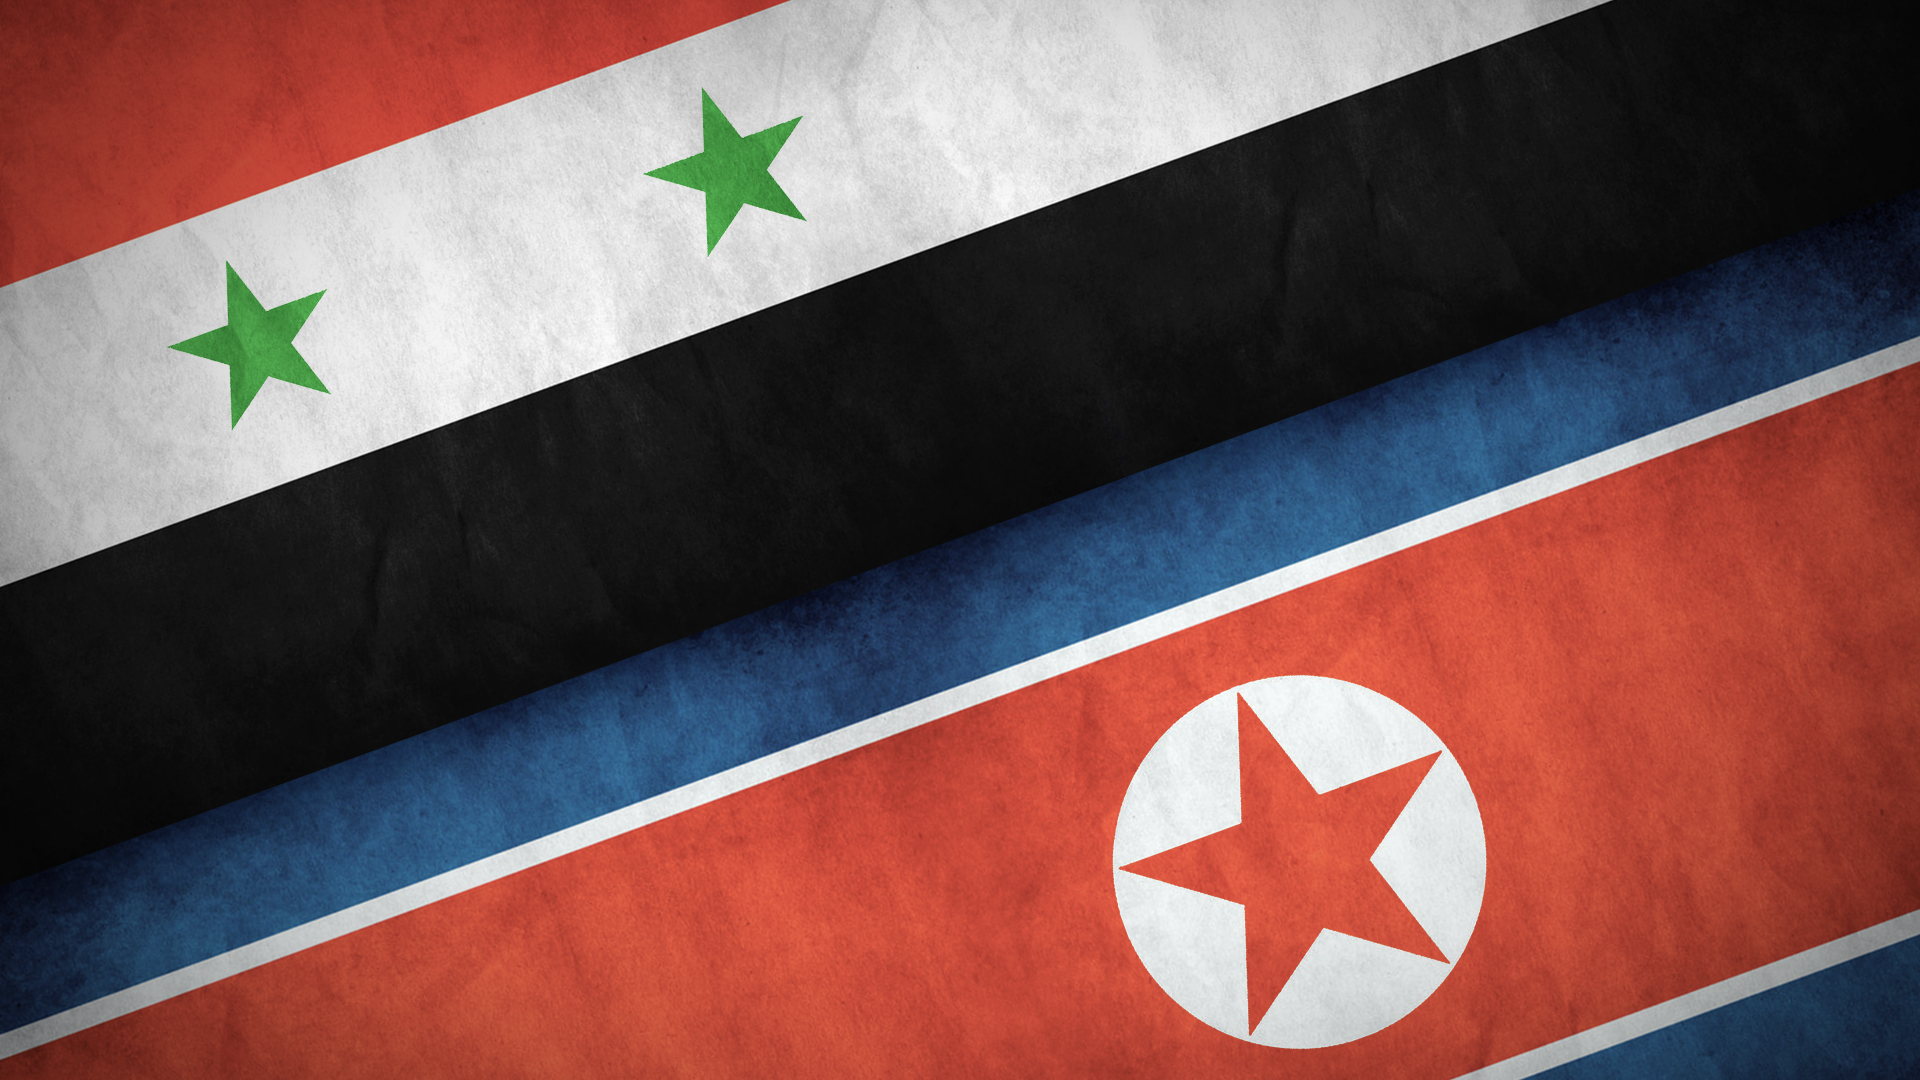 NYT: UN report links DPRK to suspected Syrian chemical weapons program